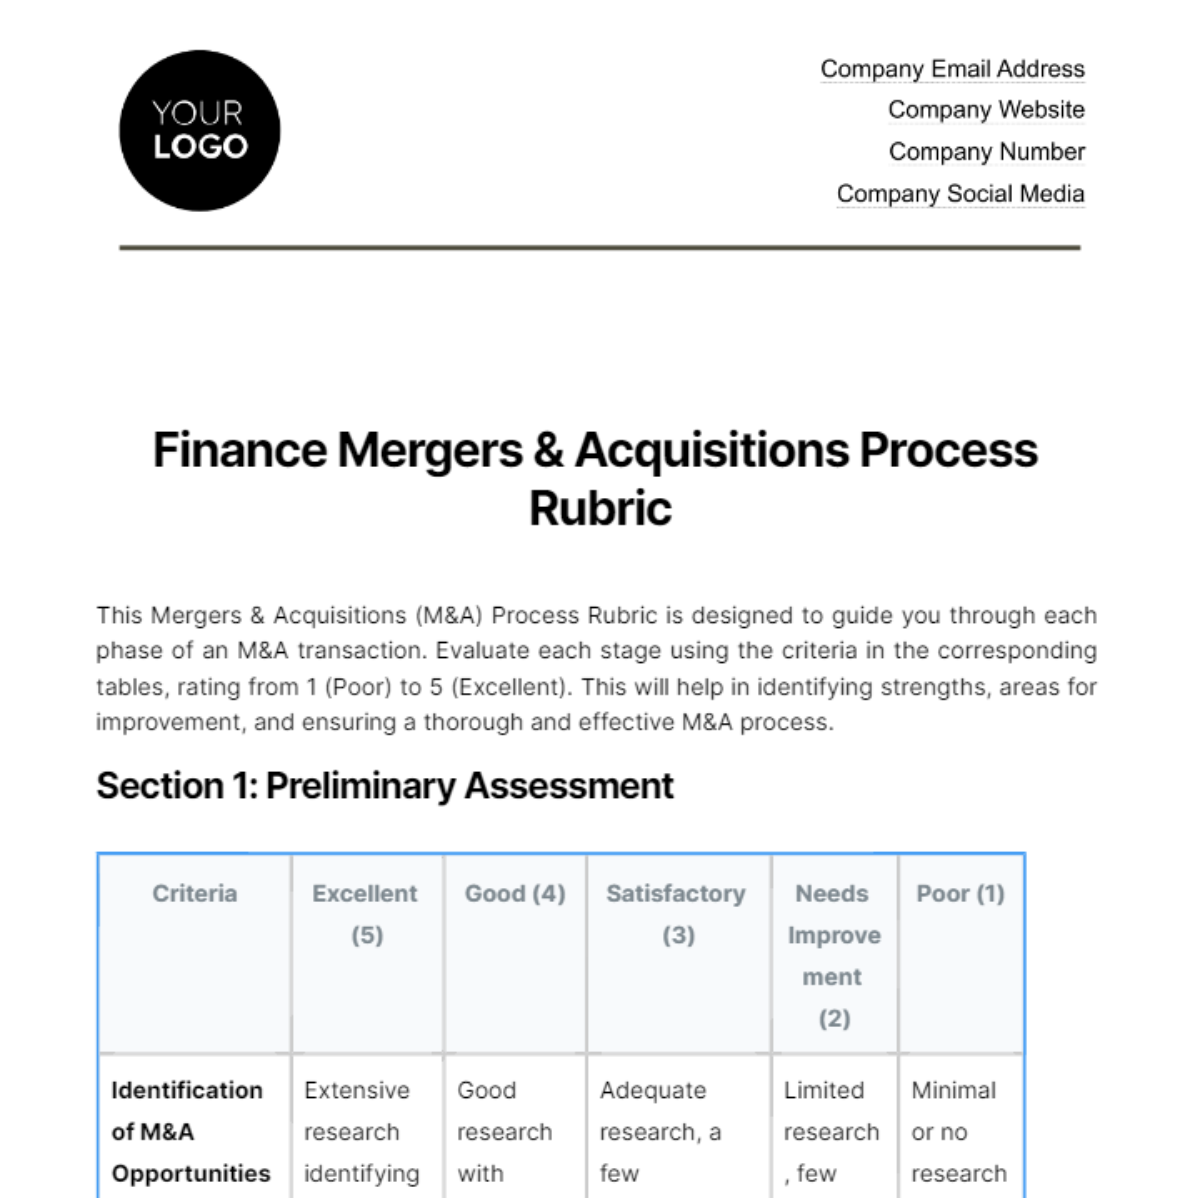 Finance Mergers & Acquisitions Process Rubric Template